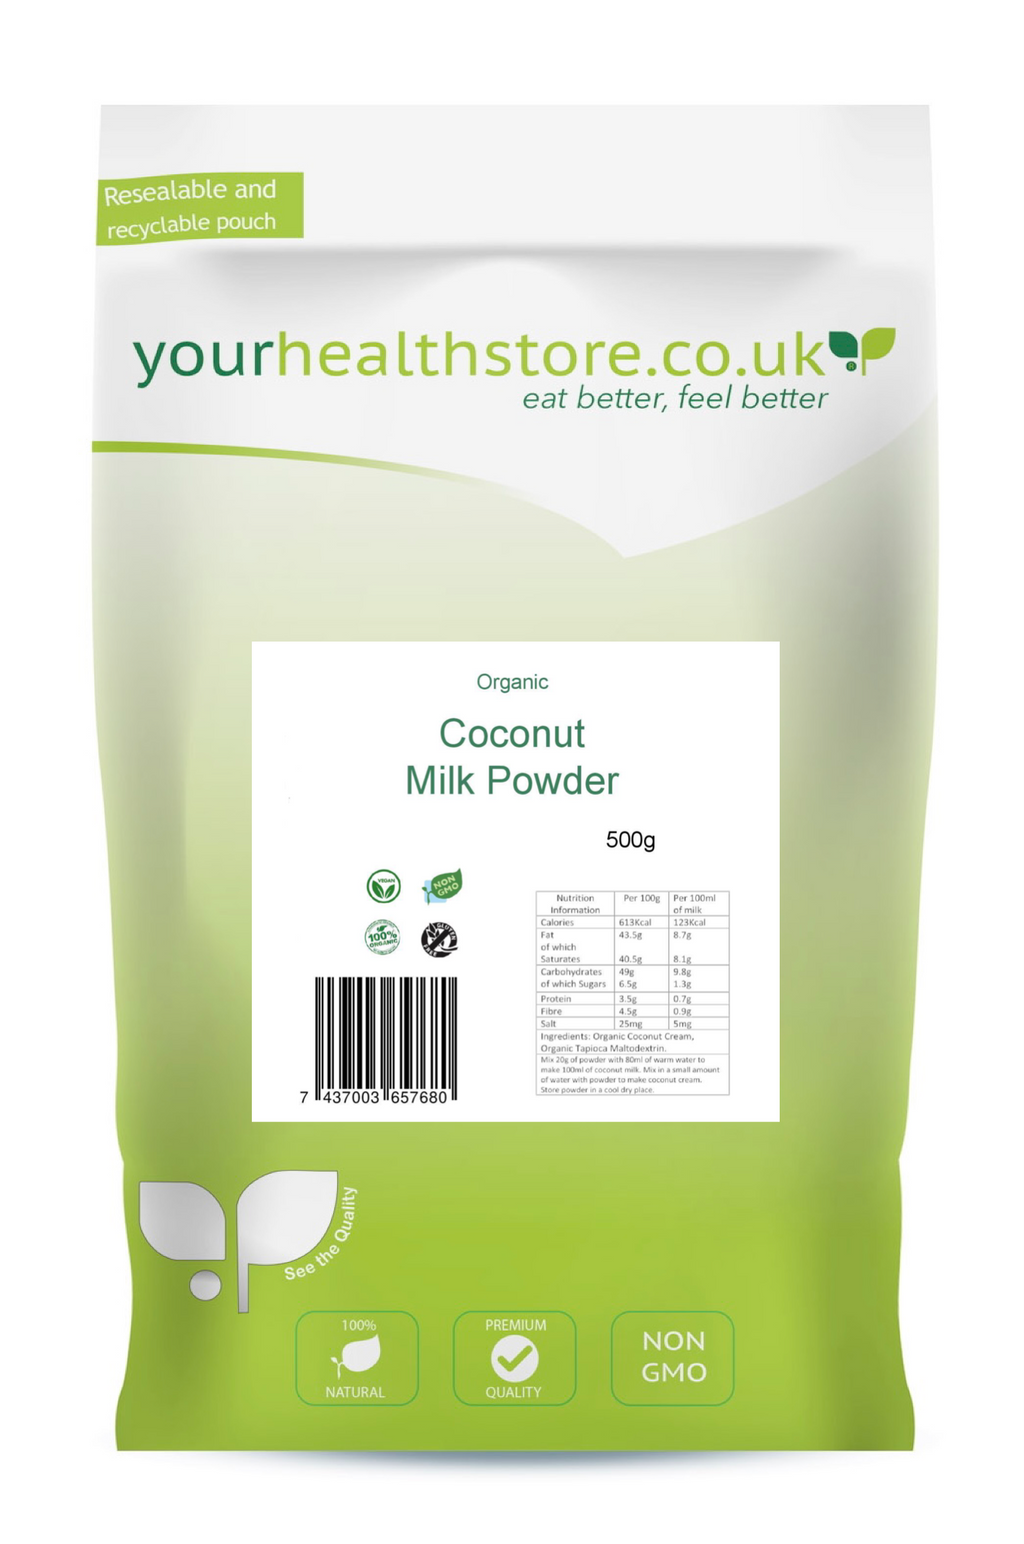 yourhealthstore Vegan Coconut Milk Powder 500g, No Added Glucose Syrup, No Added Thickeners, Dairy Free, Gluten Free, Made in Sri Lanka, (Recyclable Pouch)